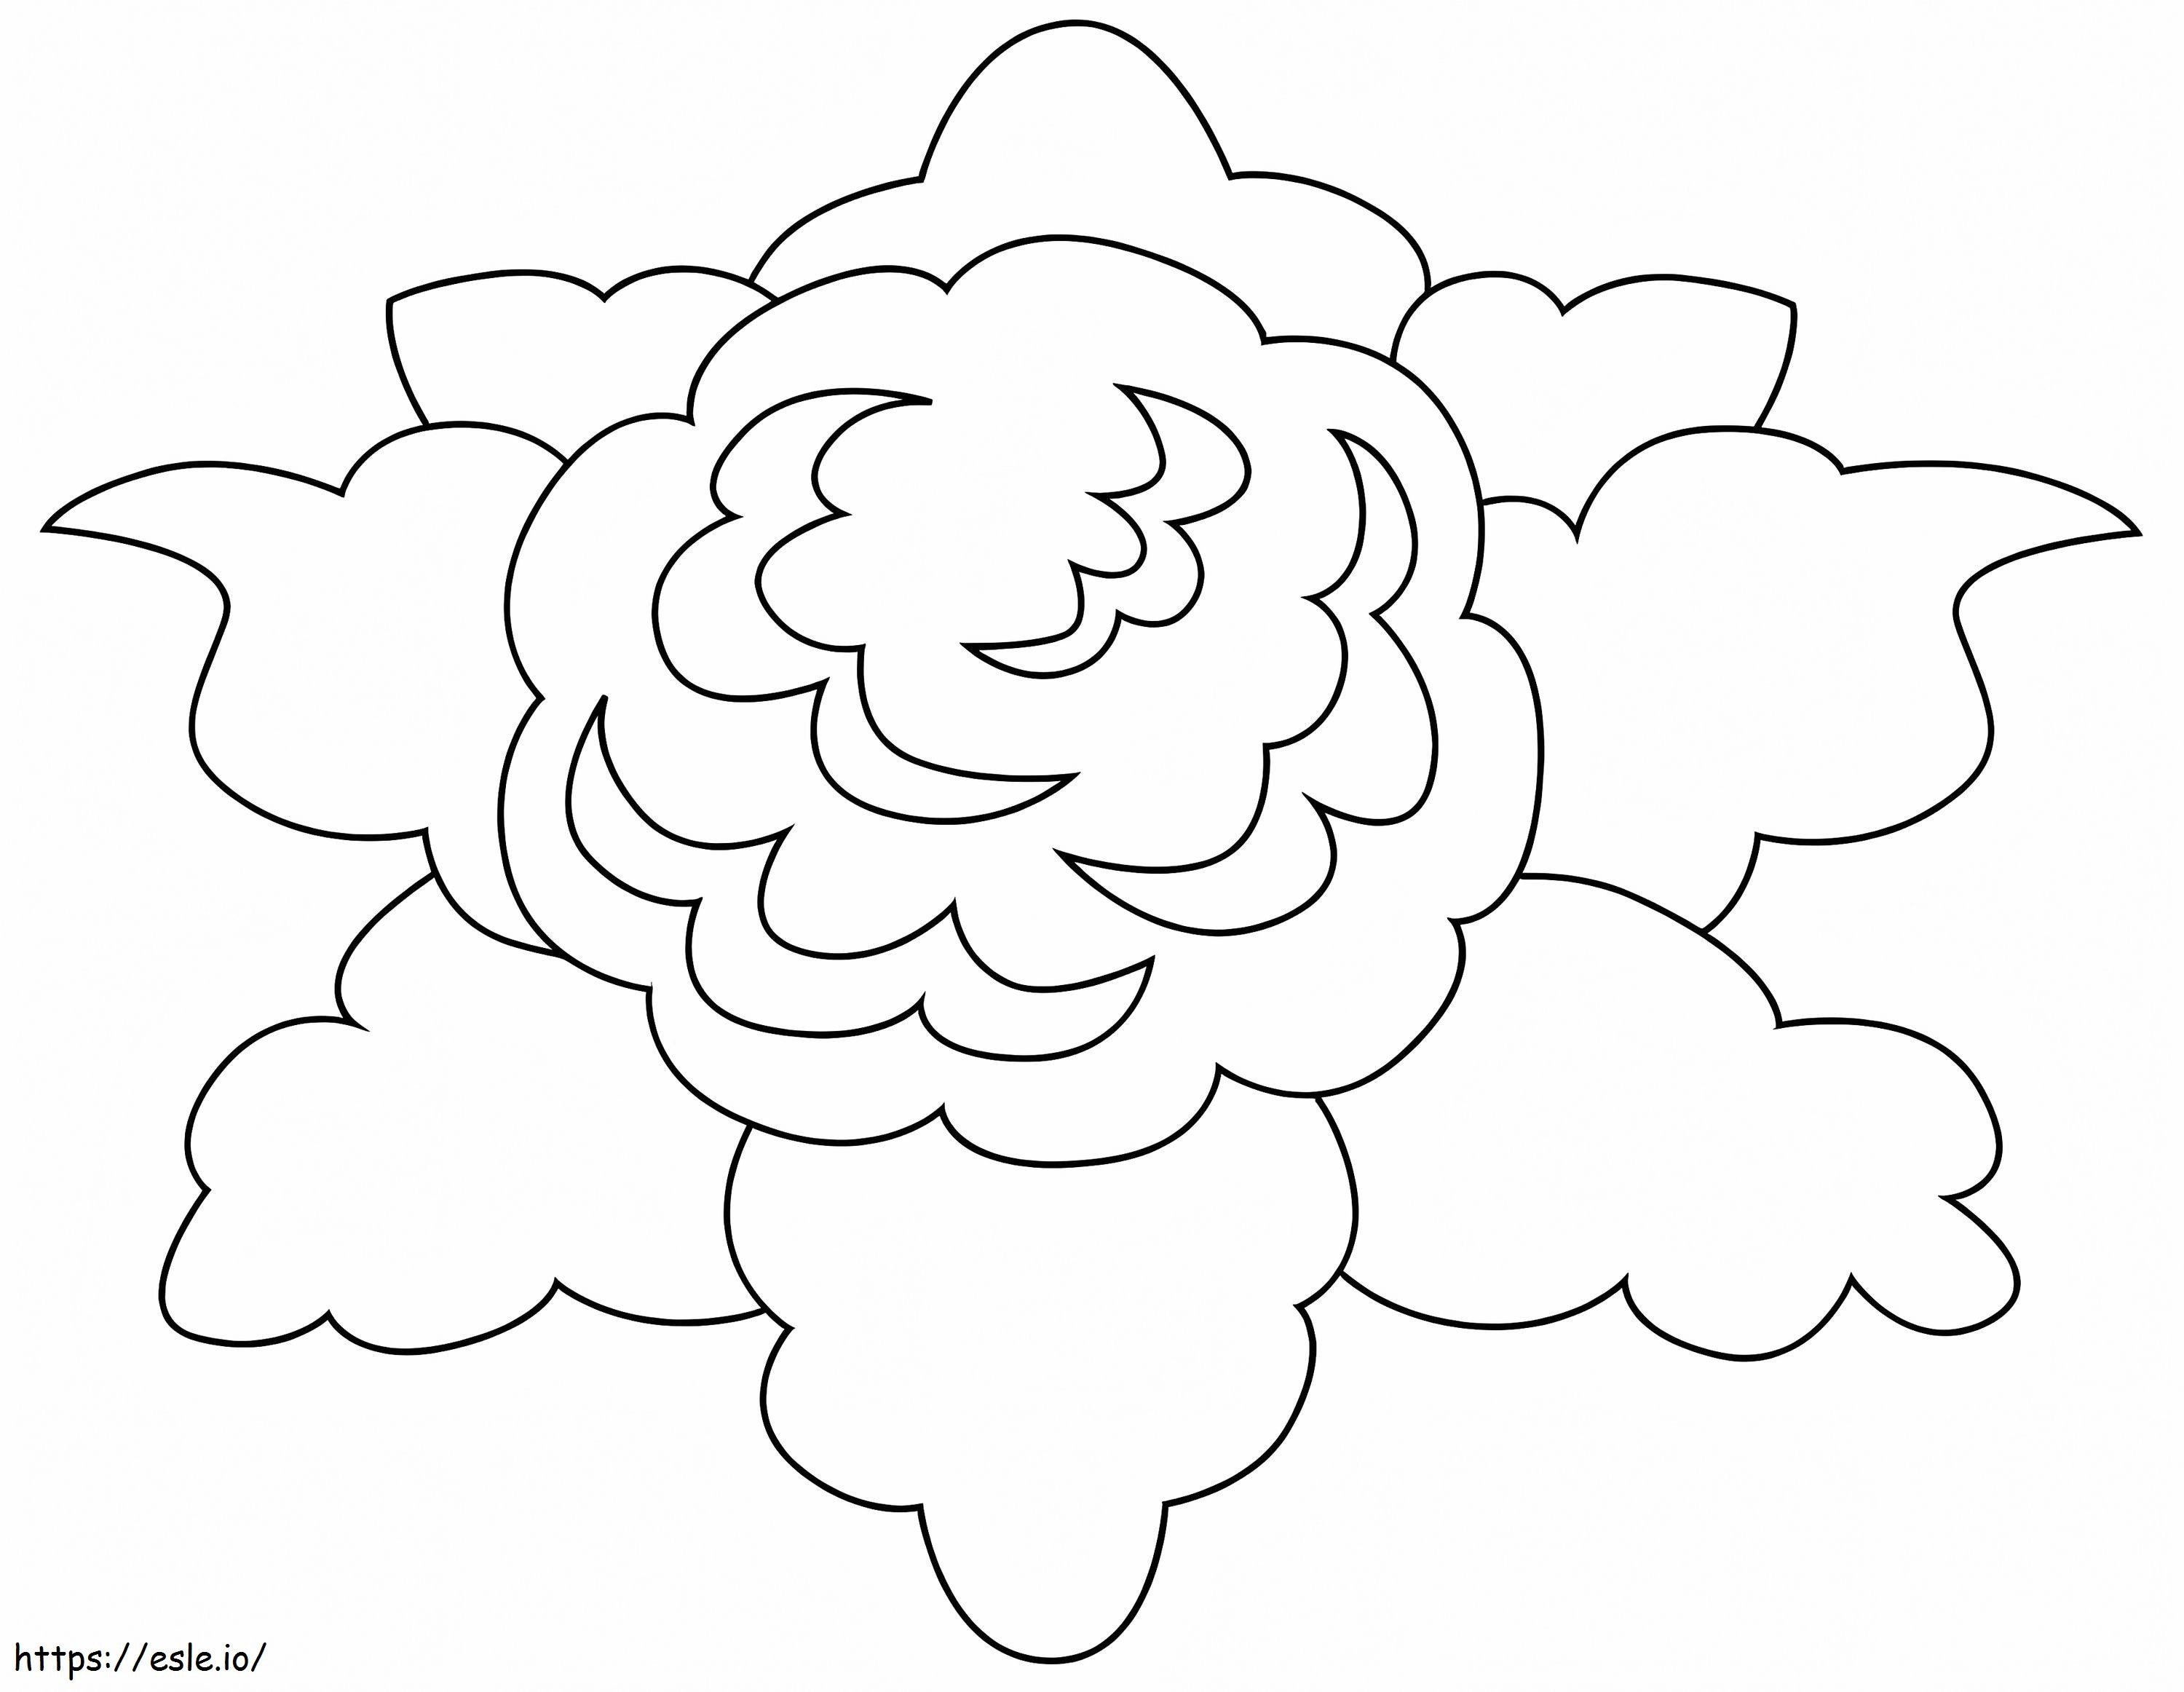 Cauliflower Easy coloring page